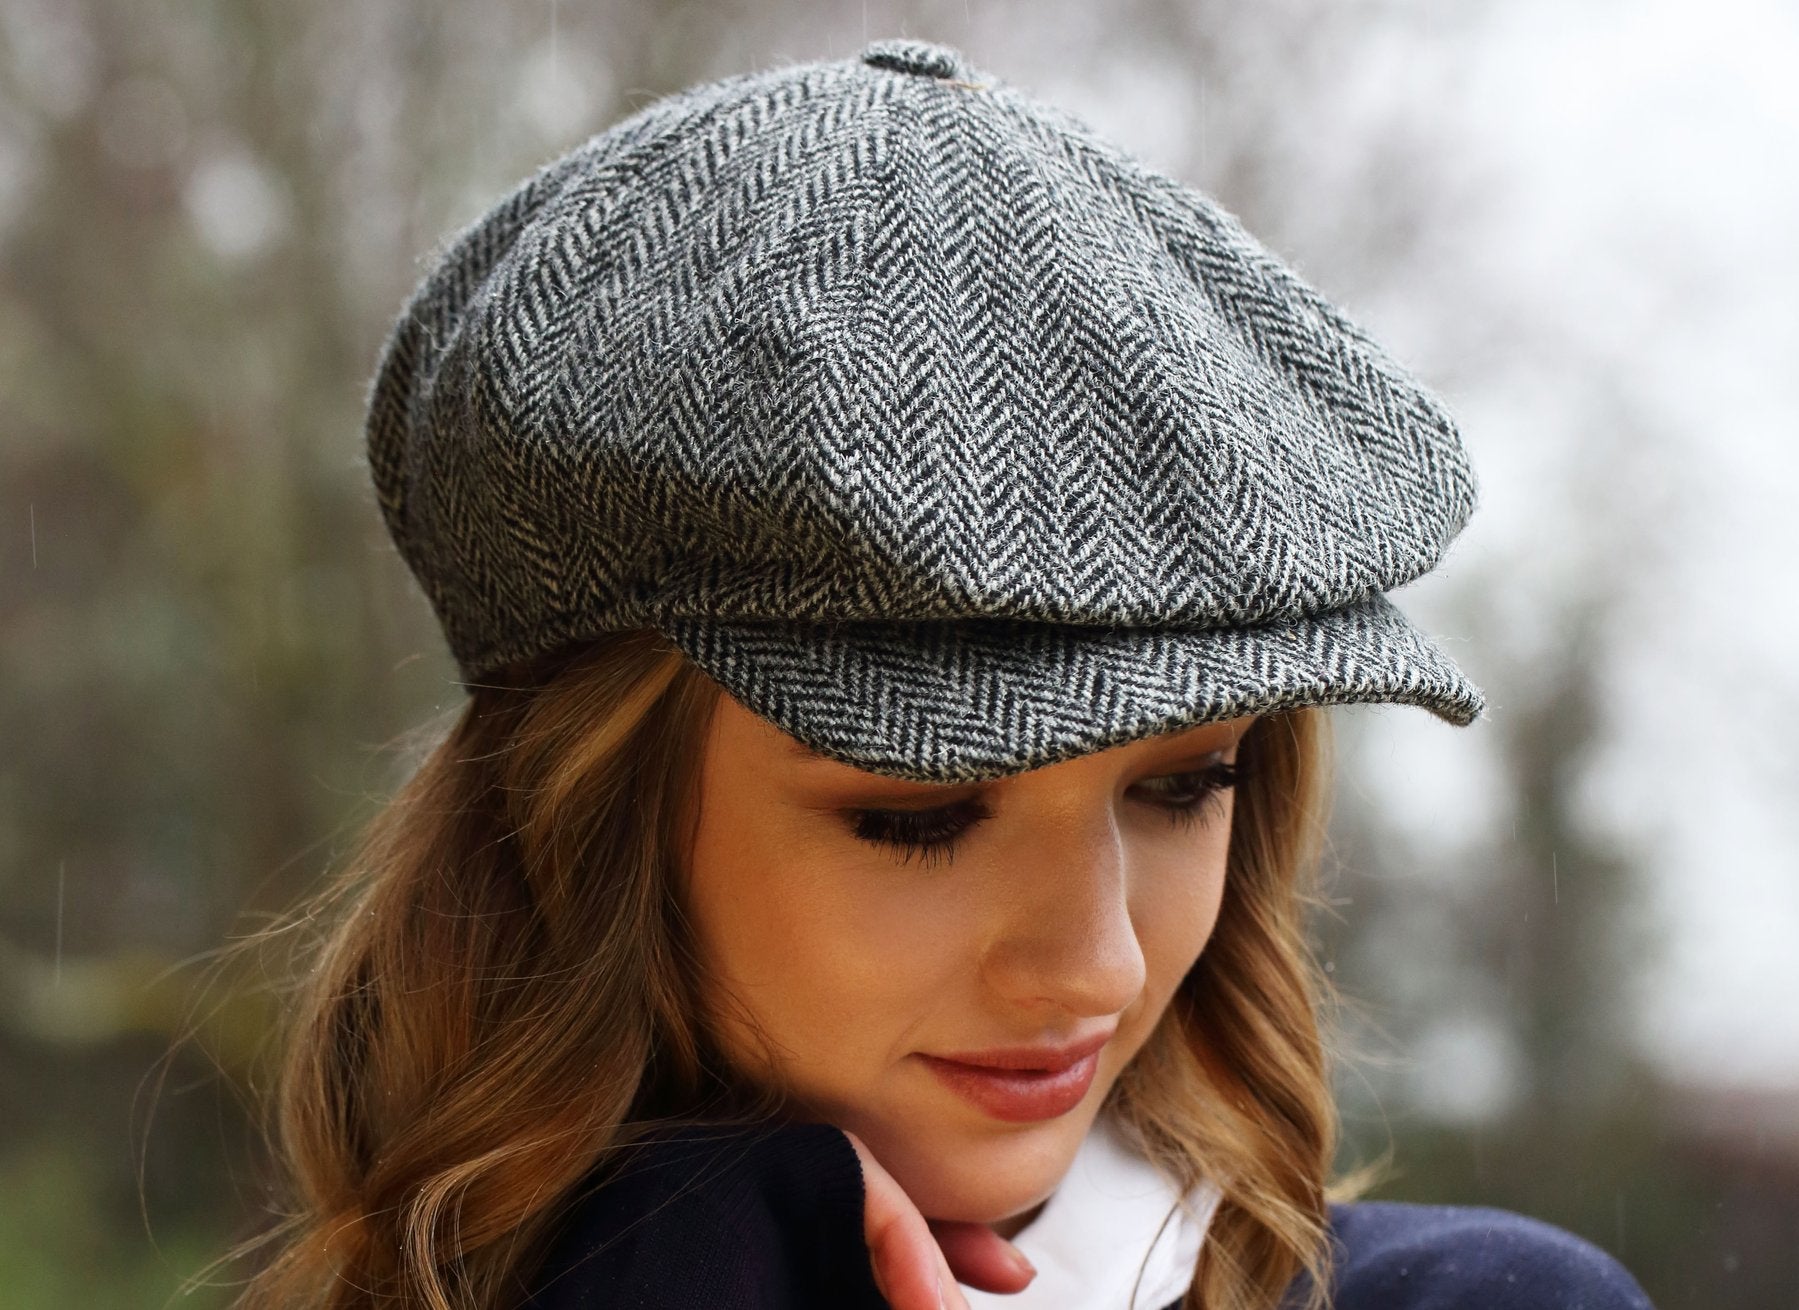 woman wearing a Classic black and white herringbone Peaky Blinders style cap by Hanna Hats of Donegal